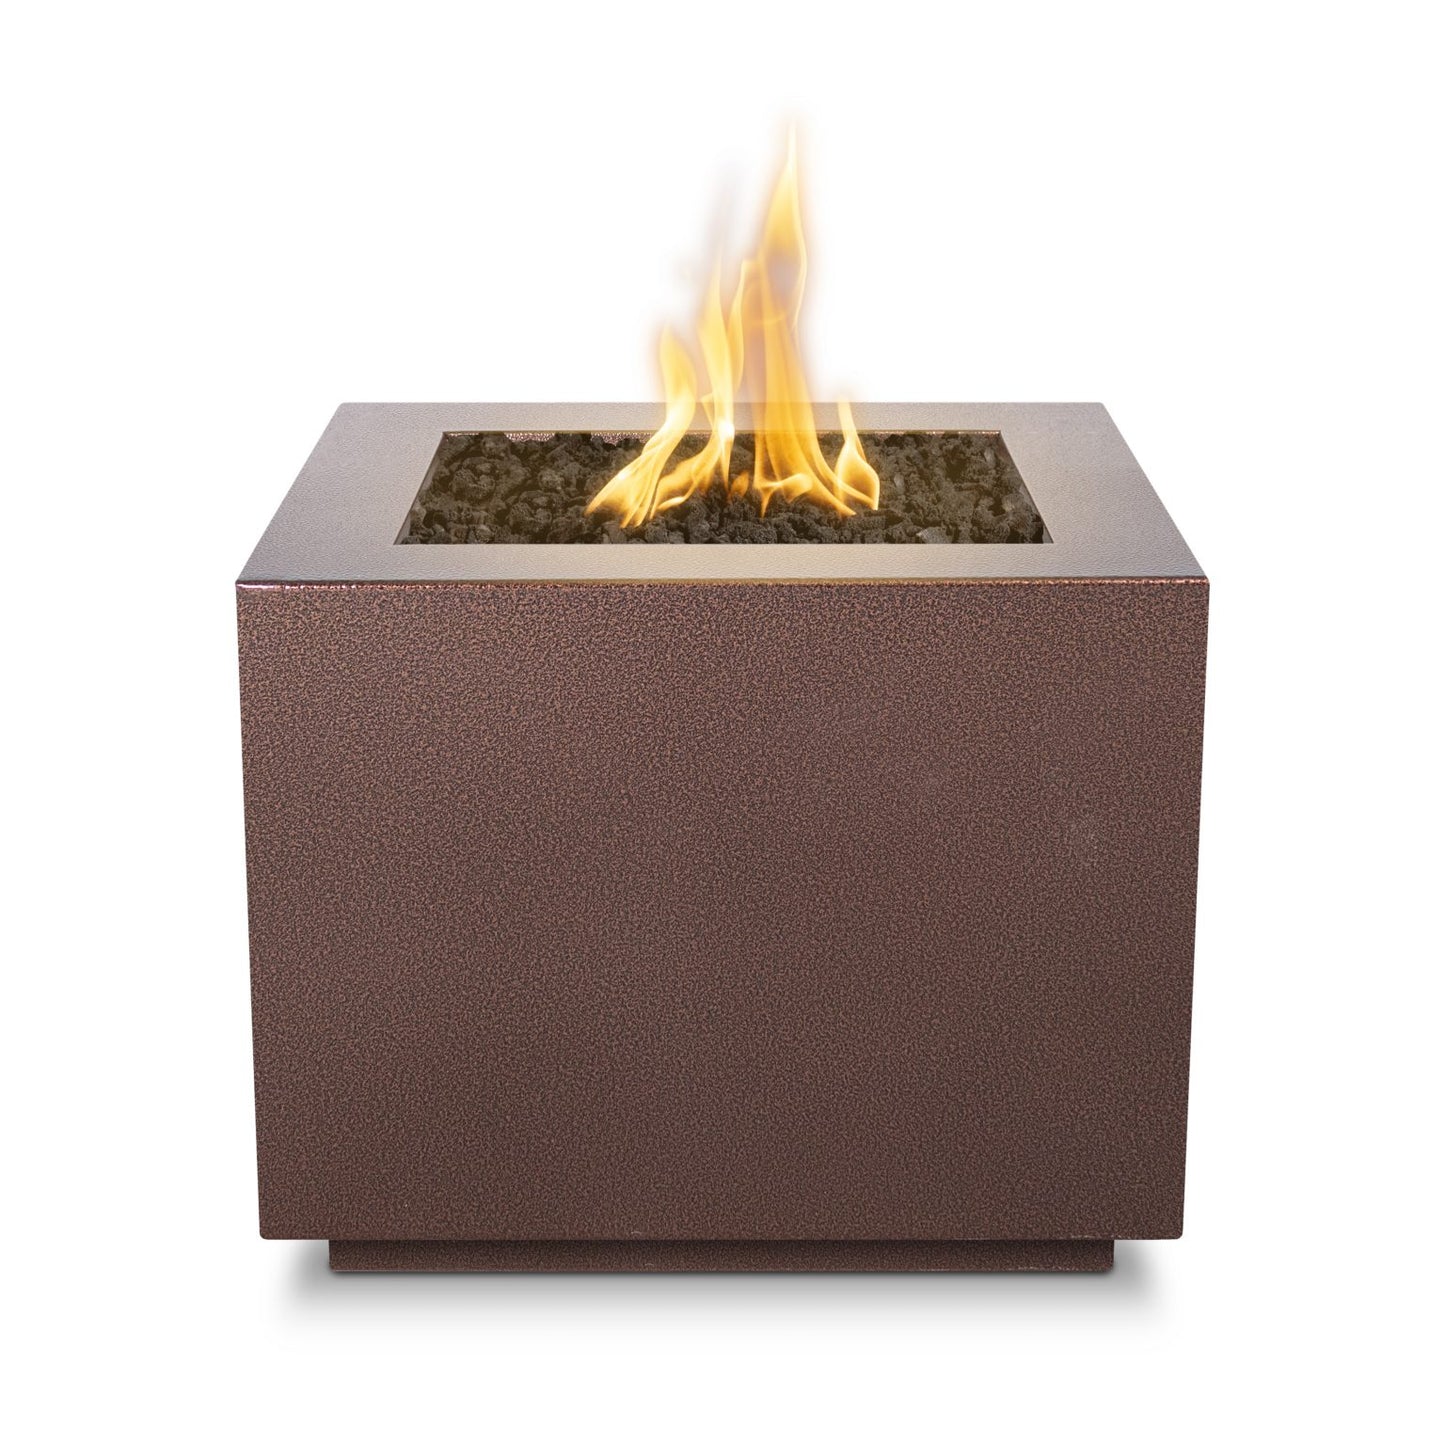 The Outdoor Plus 30" Square Forma Fire Pit Powder Coated